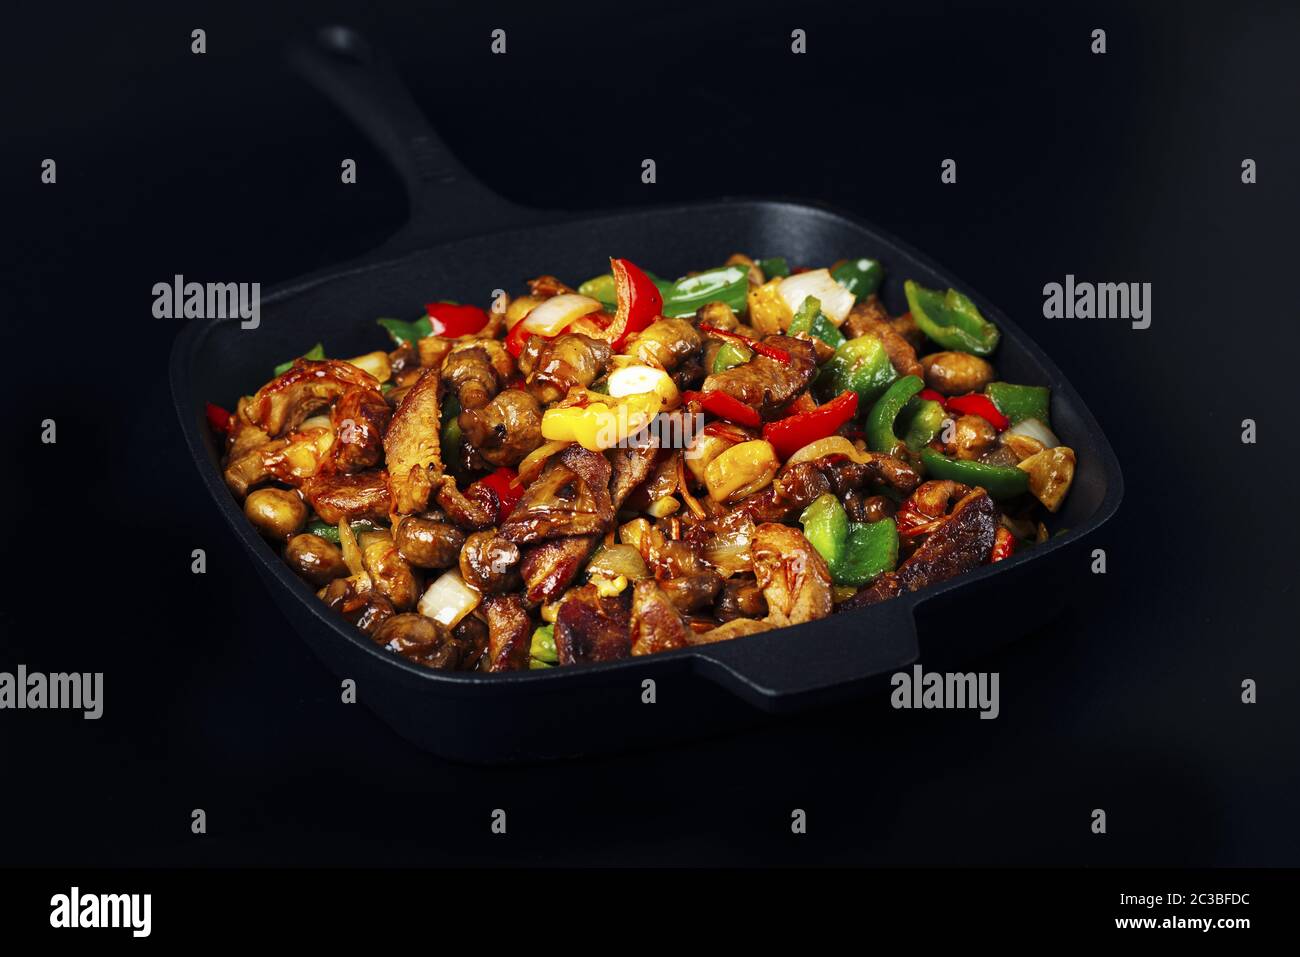 Fried meat and vegetables in cast iron pan Stock Photo